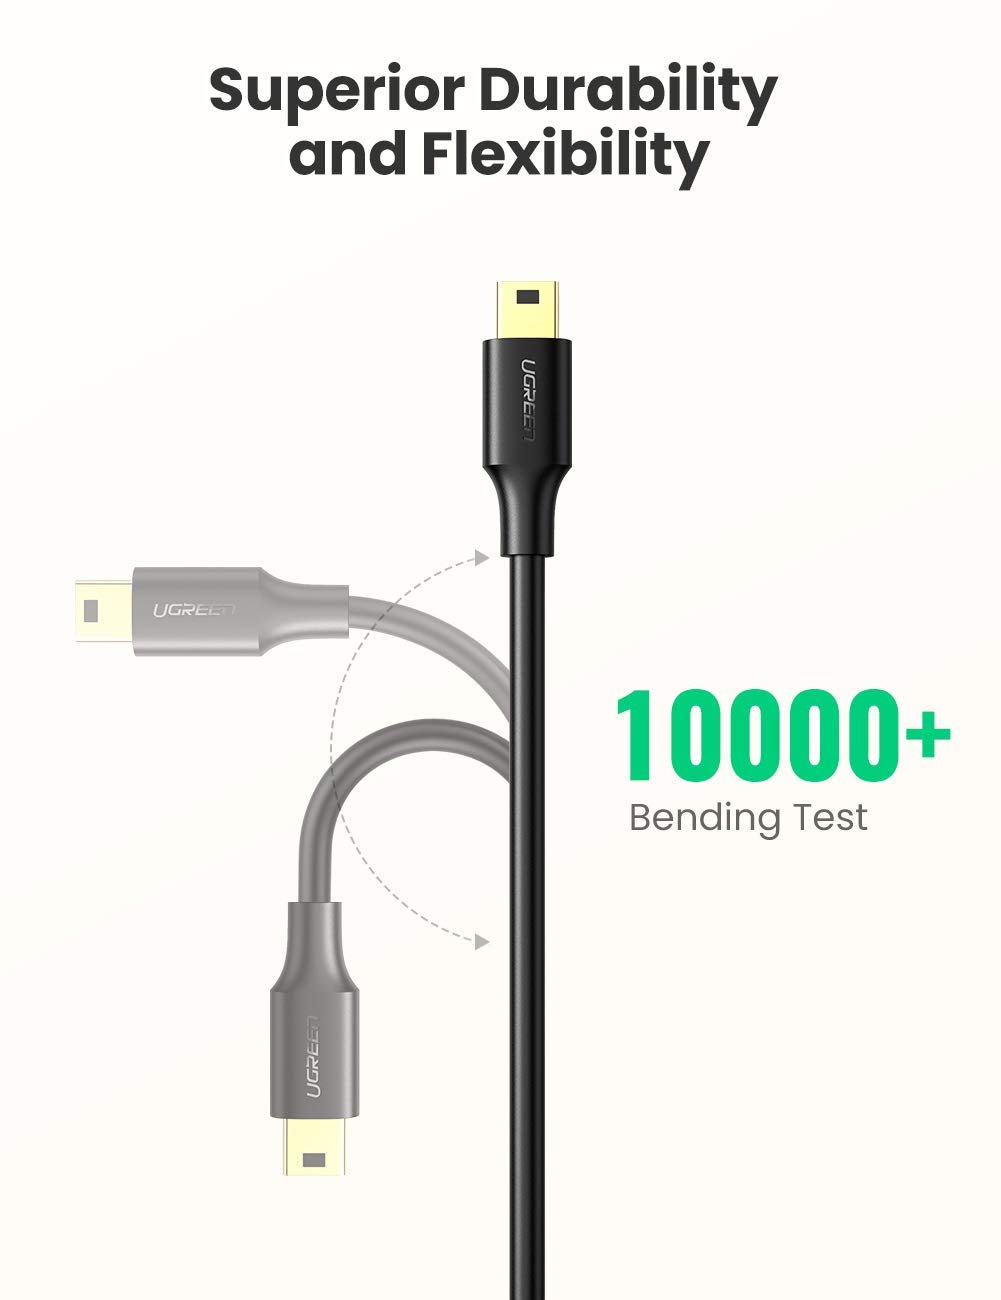 Ugreen Mini USB Charging Data Cable Gold Plated High Speed 480Mbps USB 2.0 A Male to 5-Pin Mini B Cable for Garmin Nuvi GPS,SatNav,Dash Cam,Digital Camera,PS3 Controller,Hard Drive,MP3 Player,GoPro Hero 3+,PDA etc - Hatke